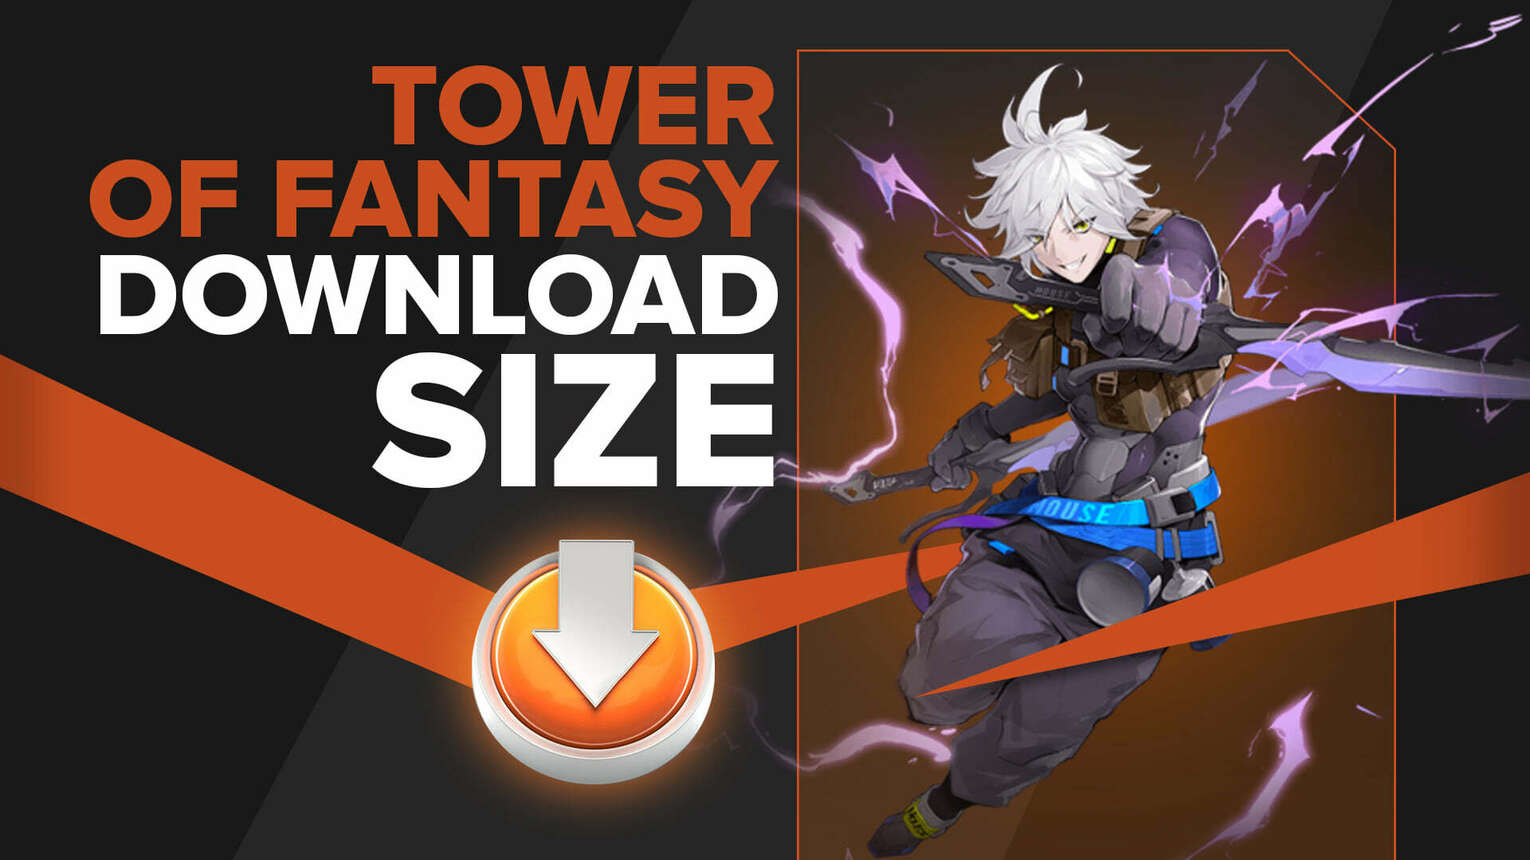 Tower of Fantasy PC - download size, requirements, and Steam release date